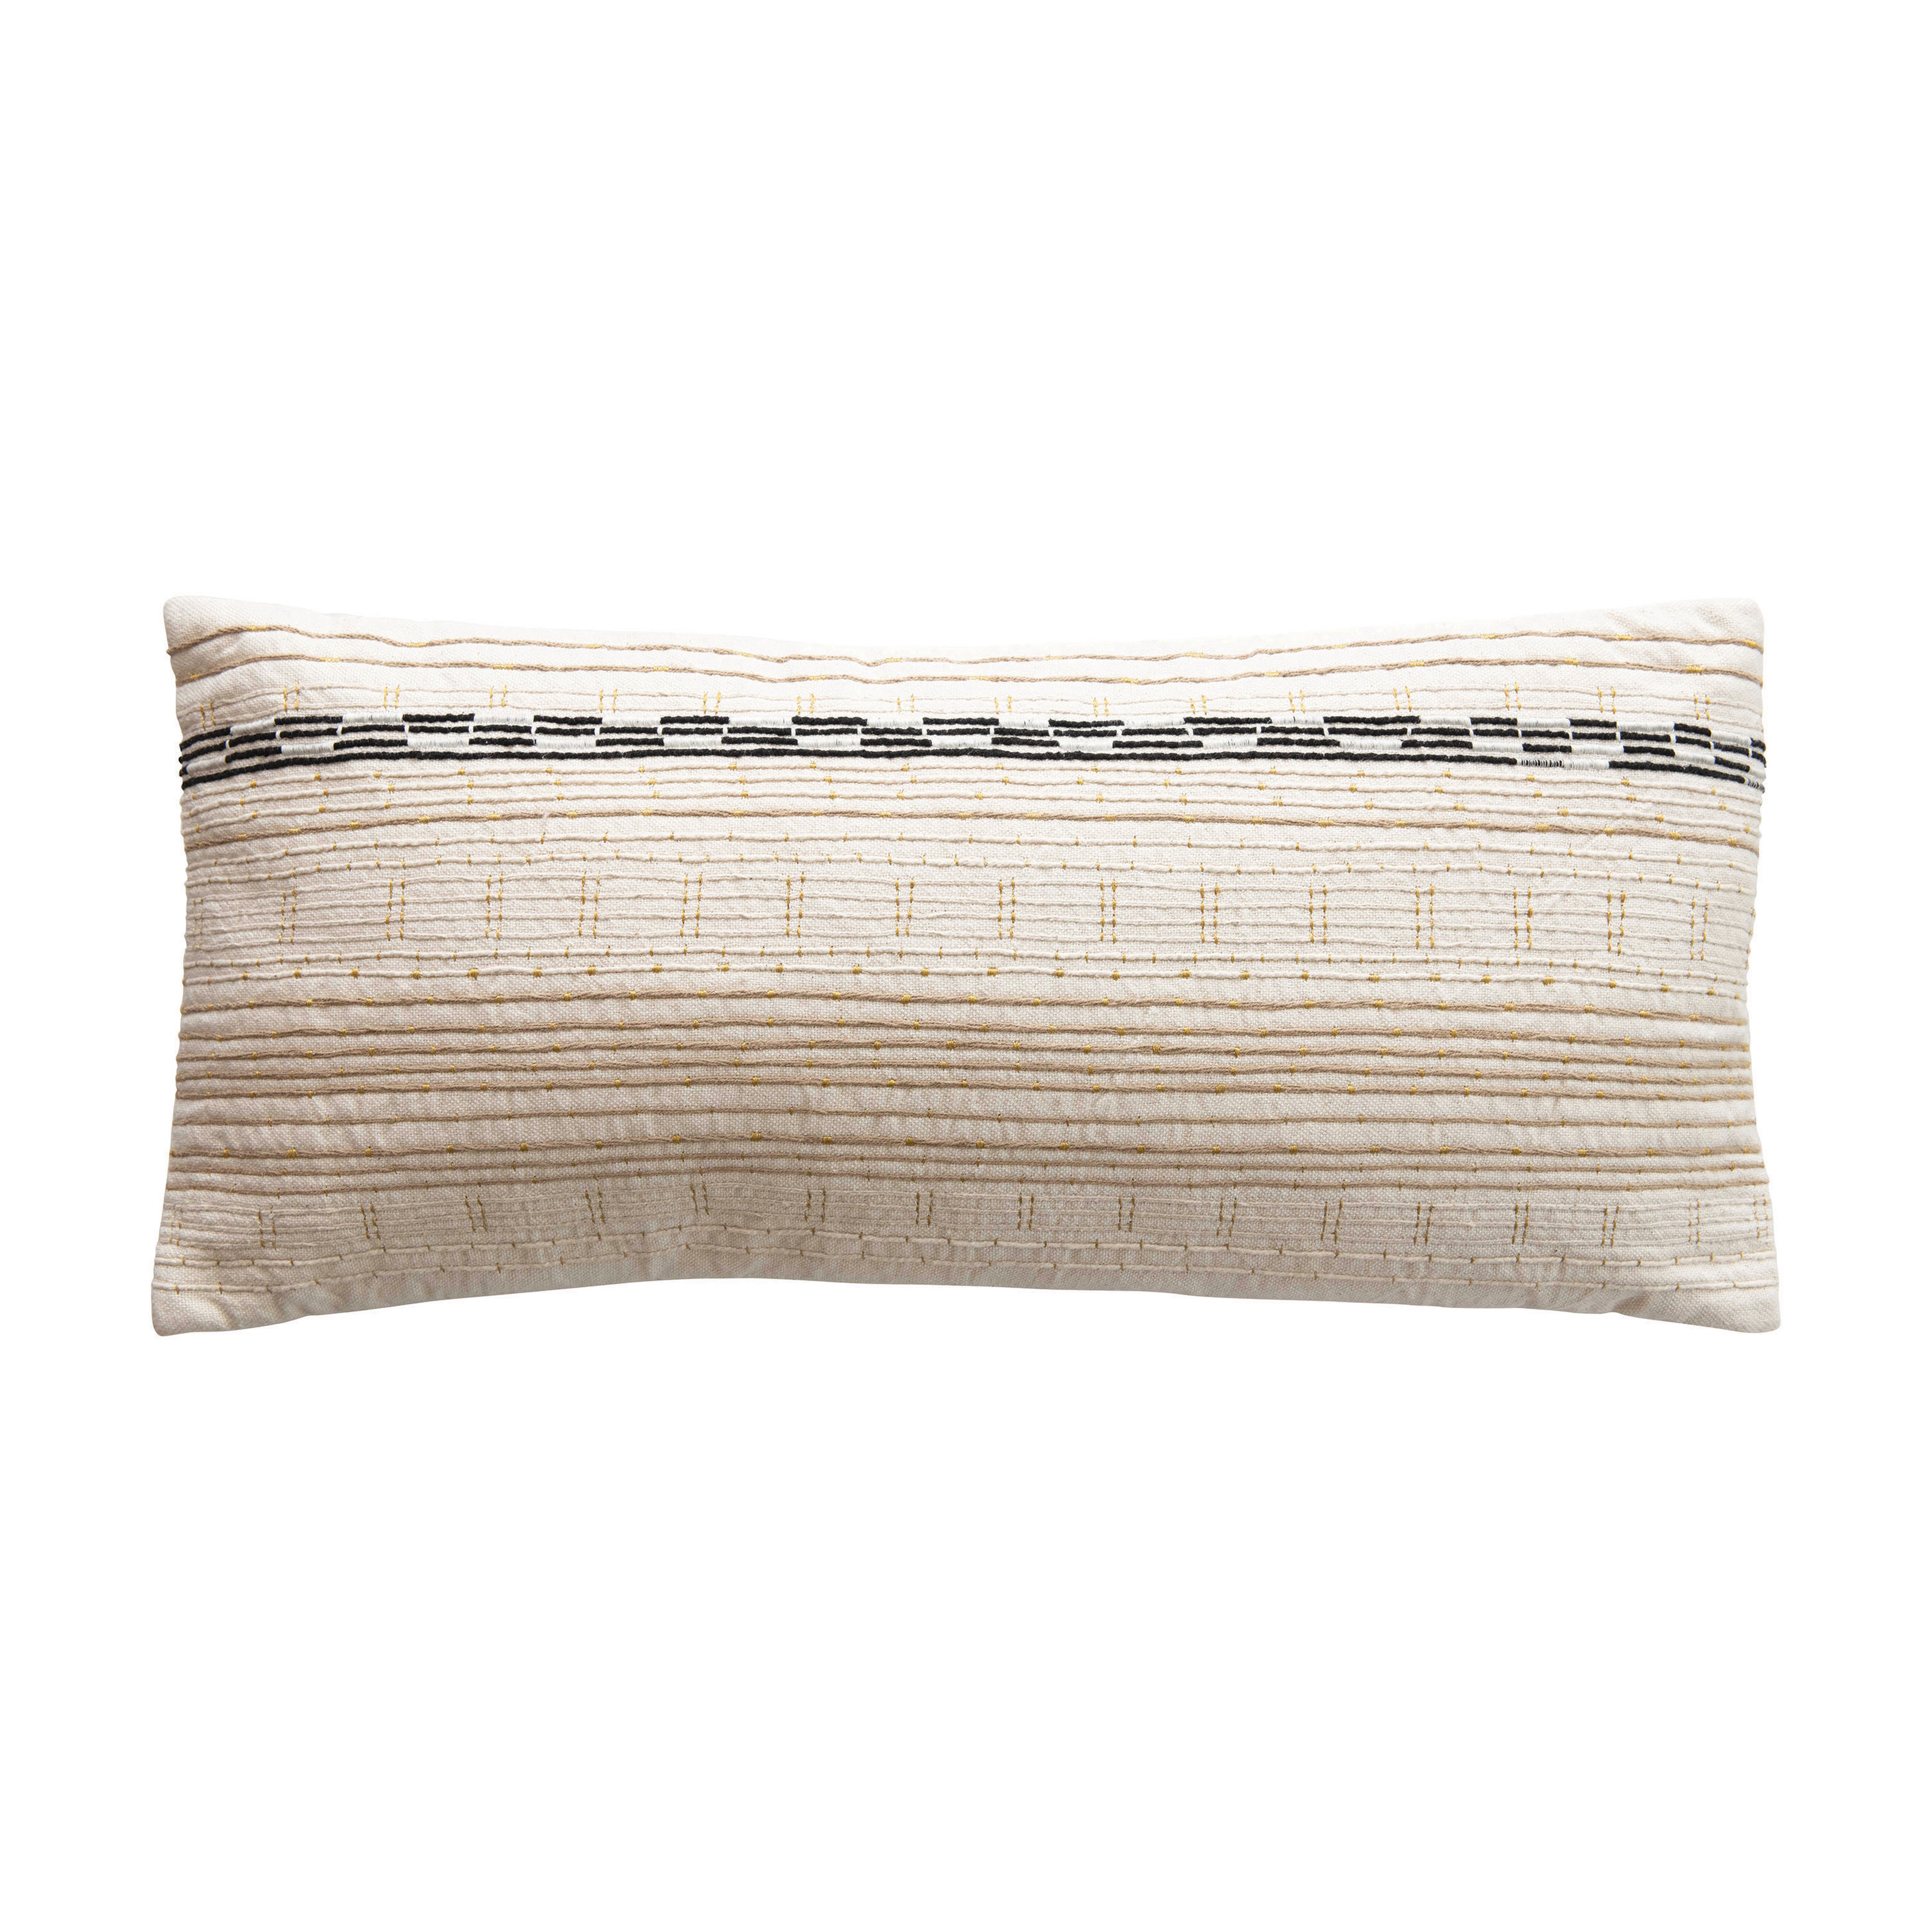 Cotton Lumbar Pillow with Embroidery & Gold Metallic Stitching, Multi Color - Nomad Home